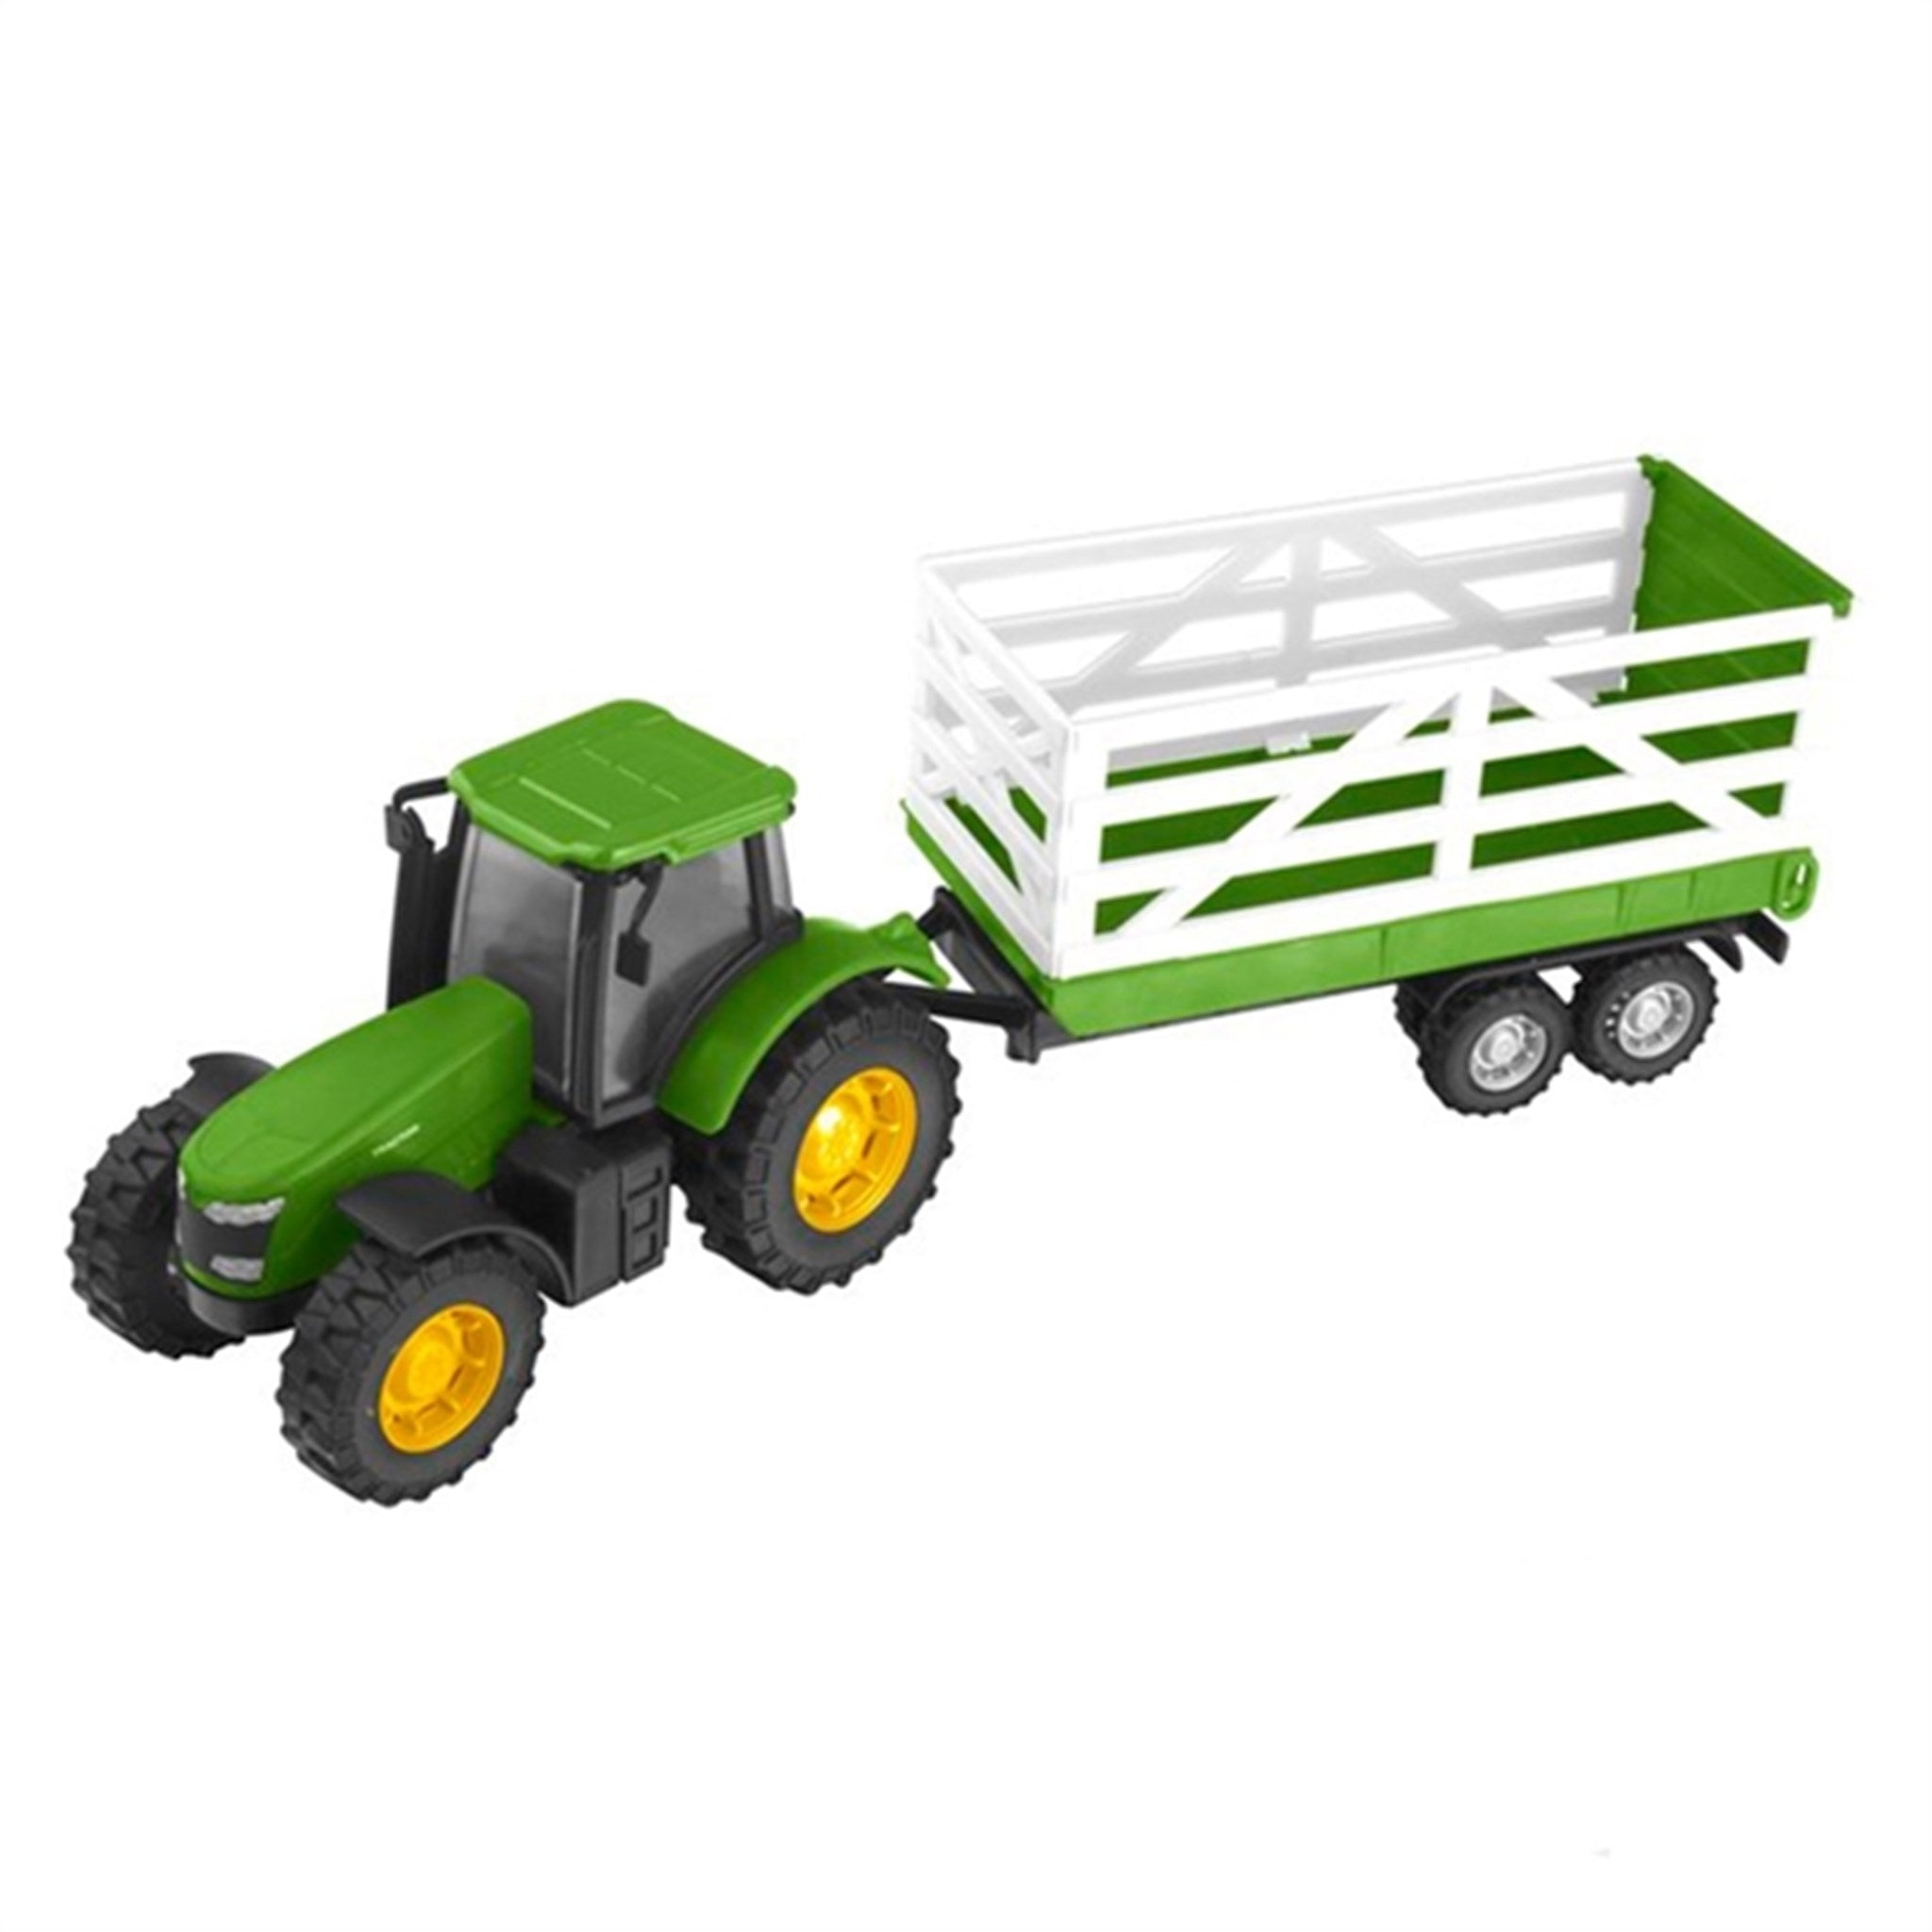 Teamsterz Tractor and Trailer Green Cage